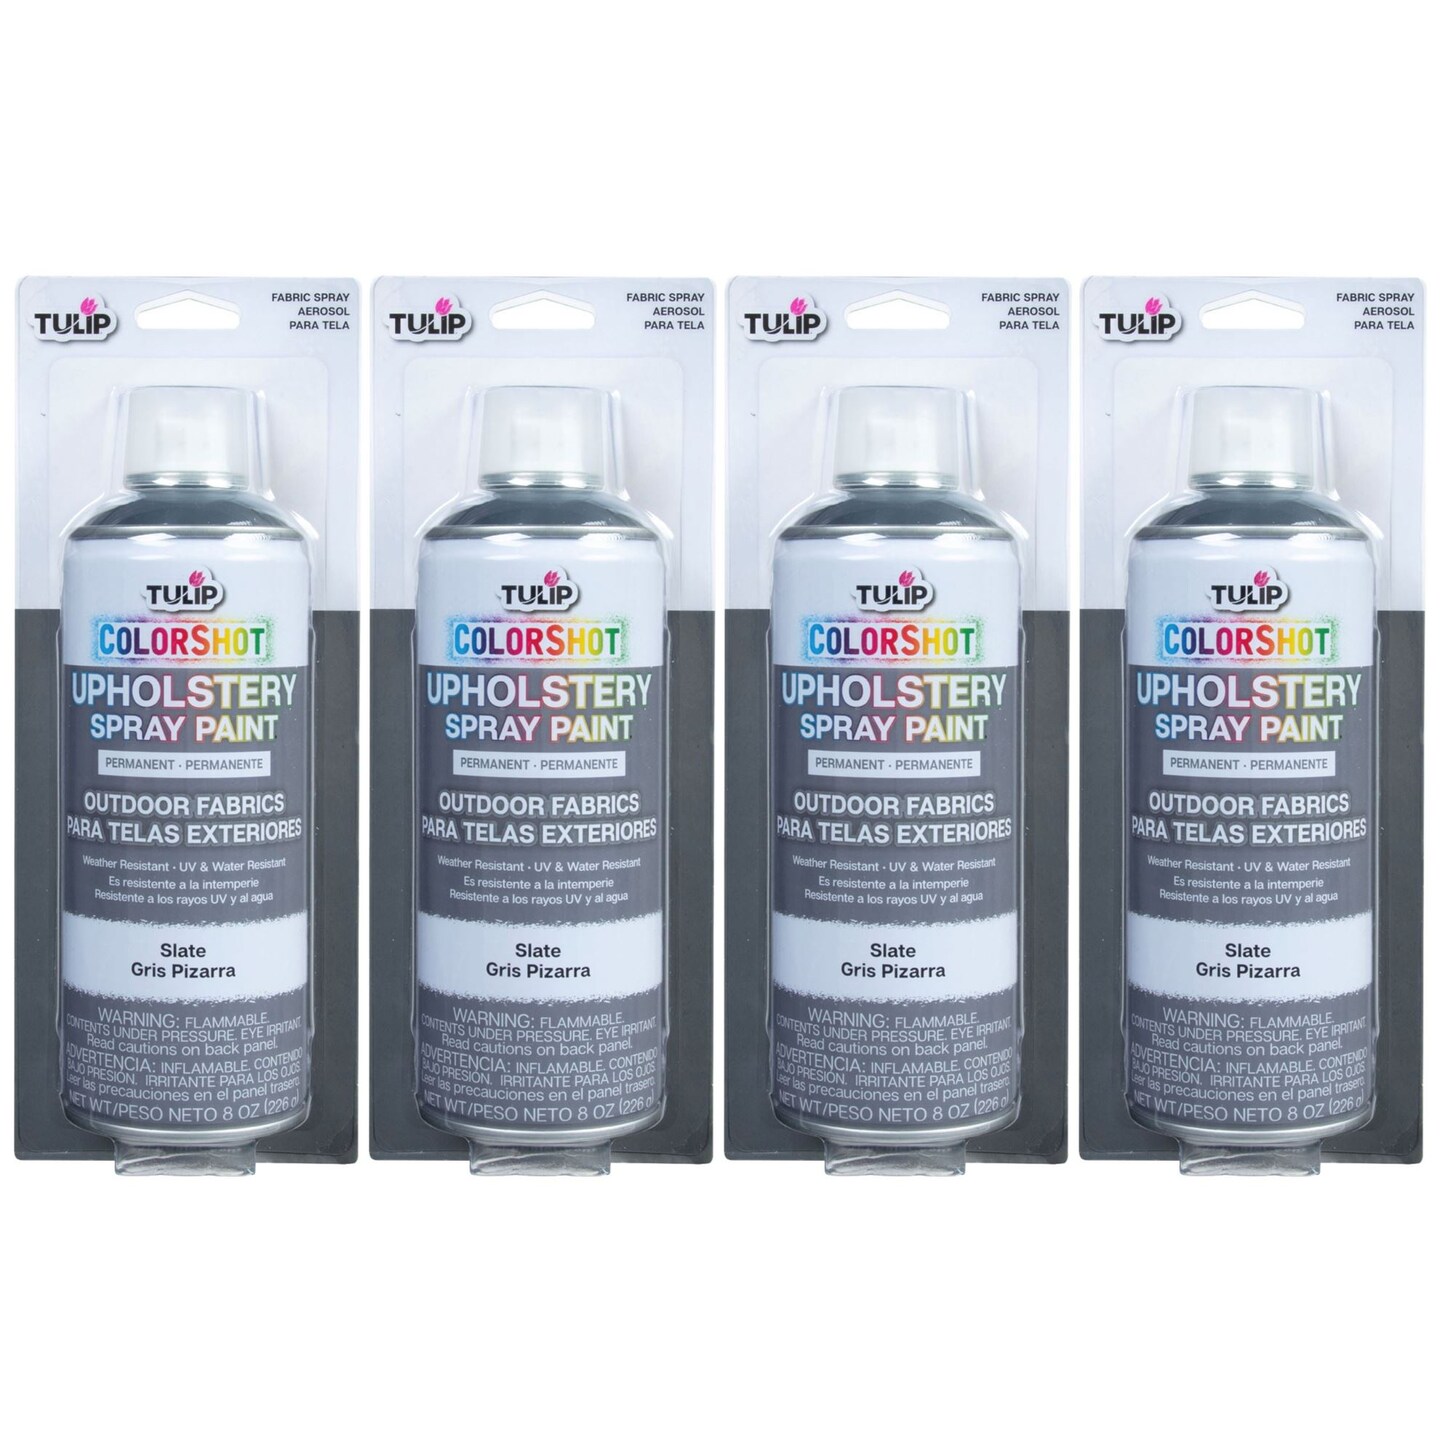 Tulip ColorShot Outdoor Fabric Upholstery Spray Slate 4 Pack